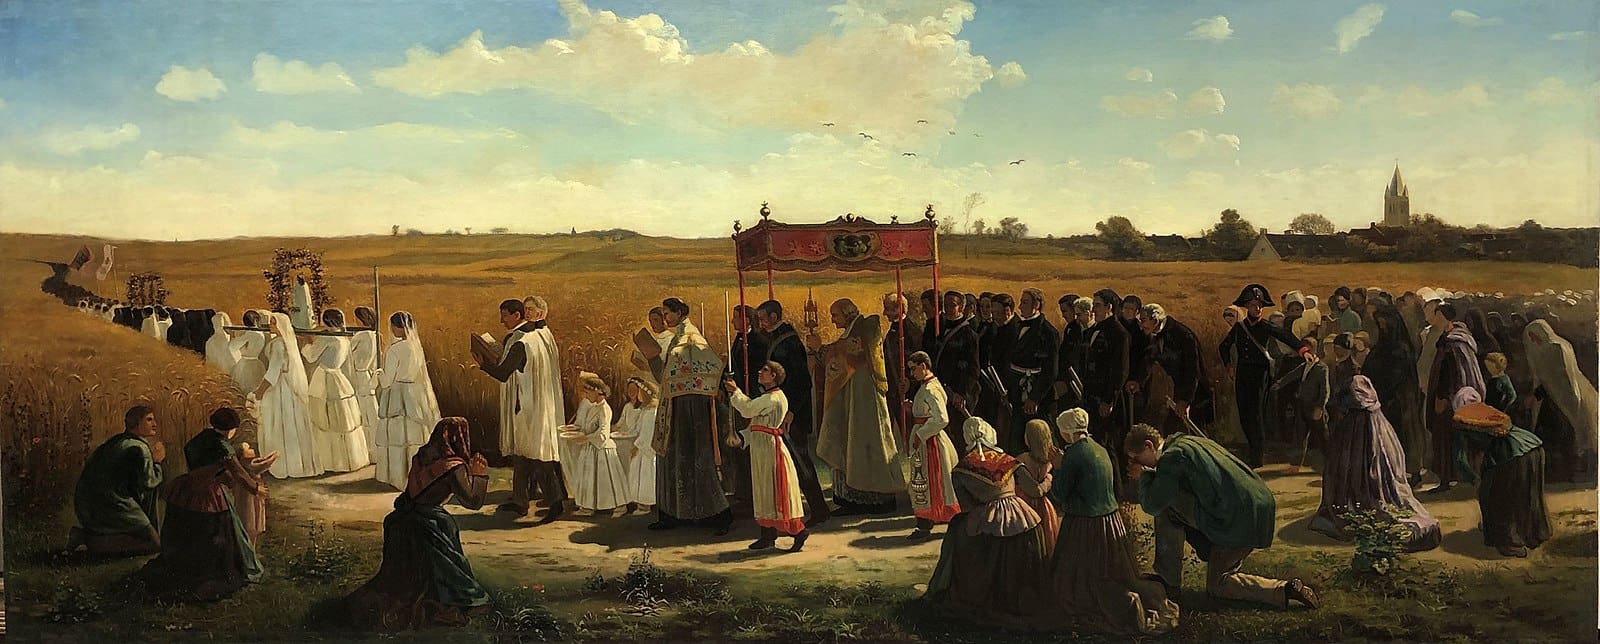 Be Careful What You Don’t Ask For: Why the Rogation Days Still Matter